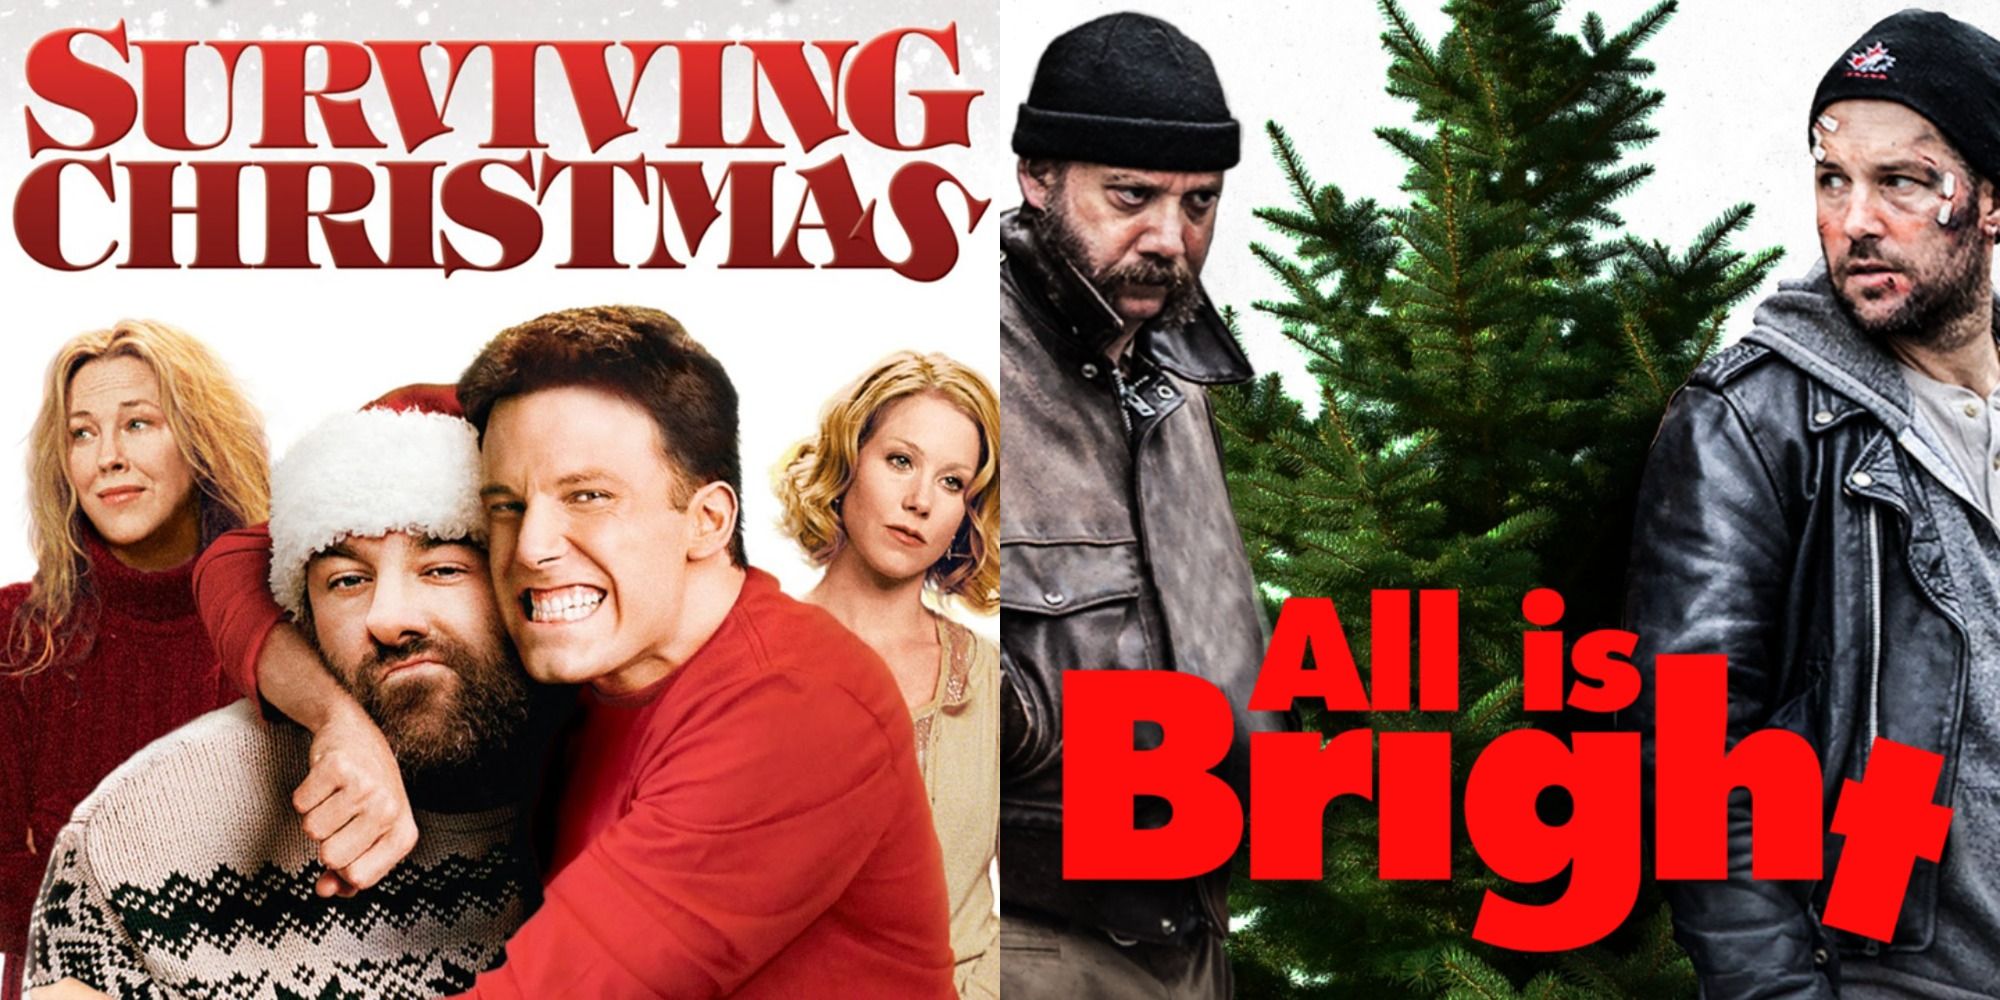 Split image showing posters for Surviving Christmas and All is Bright